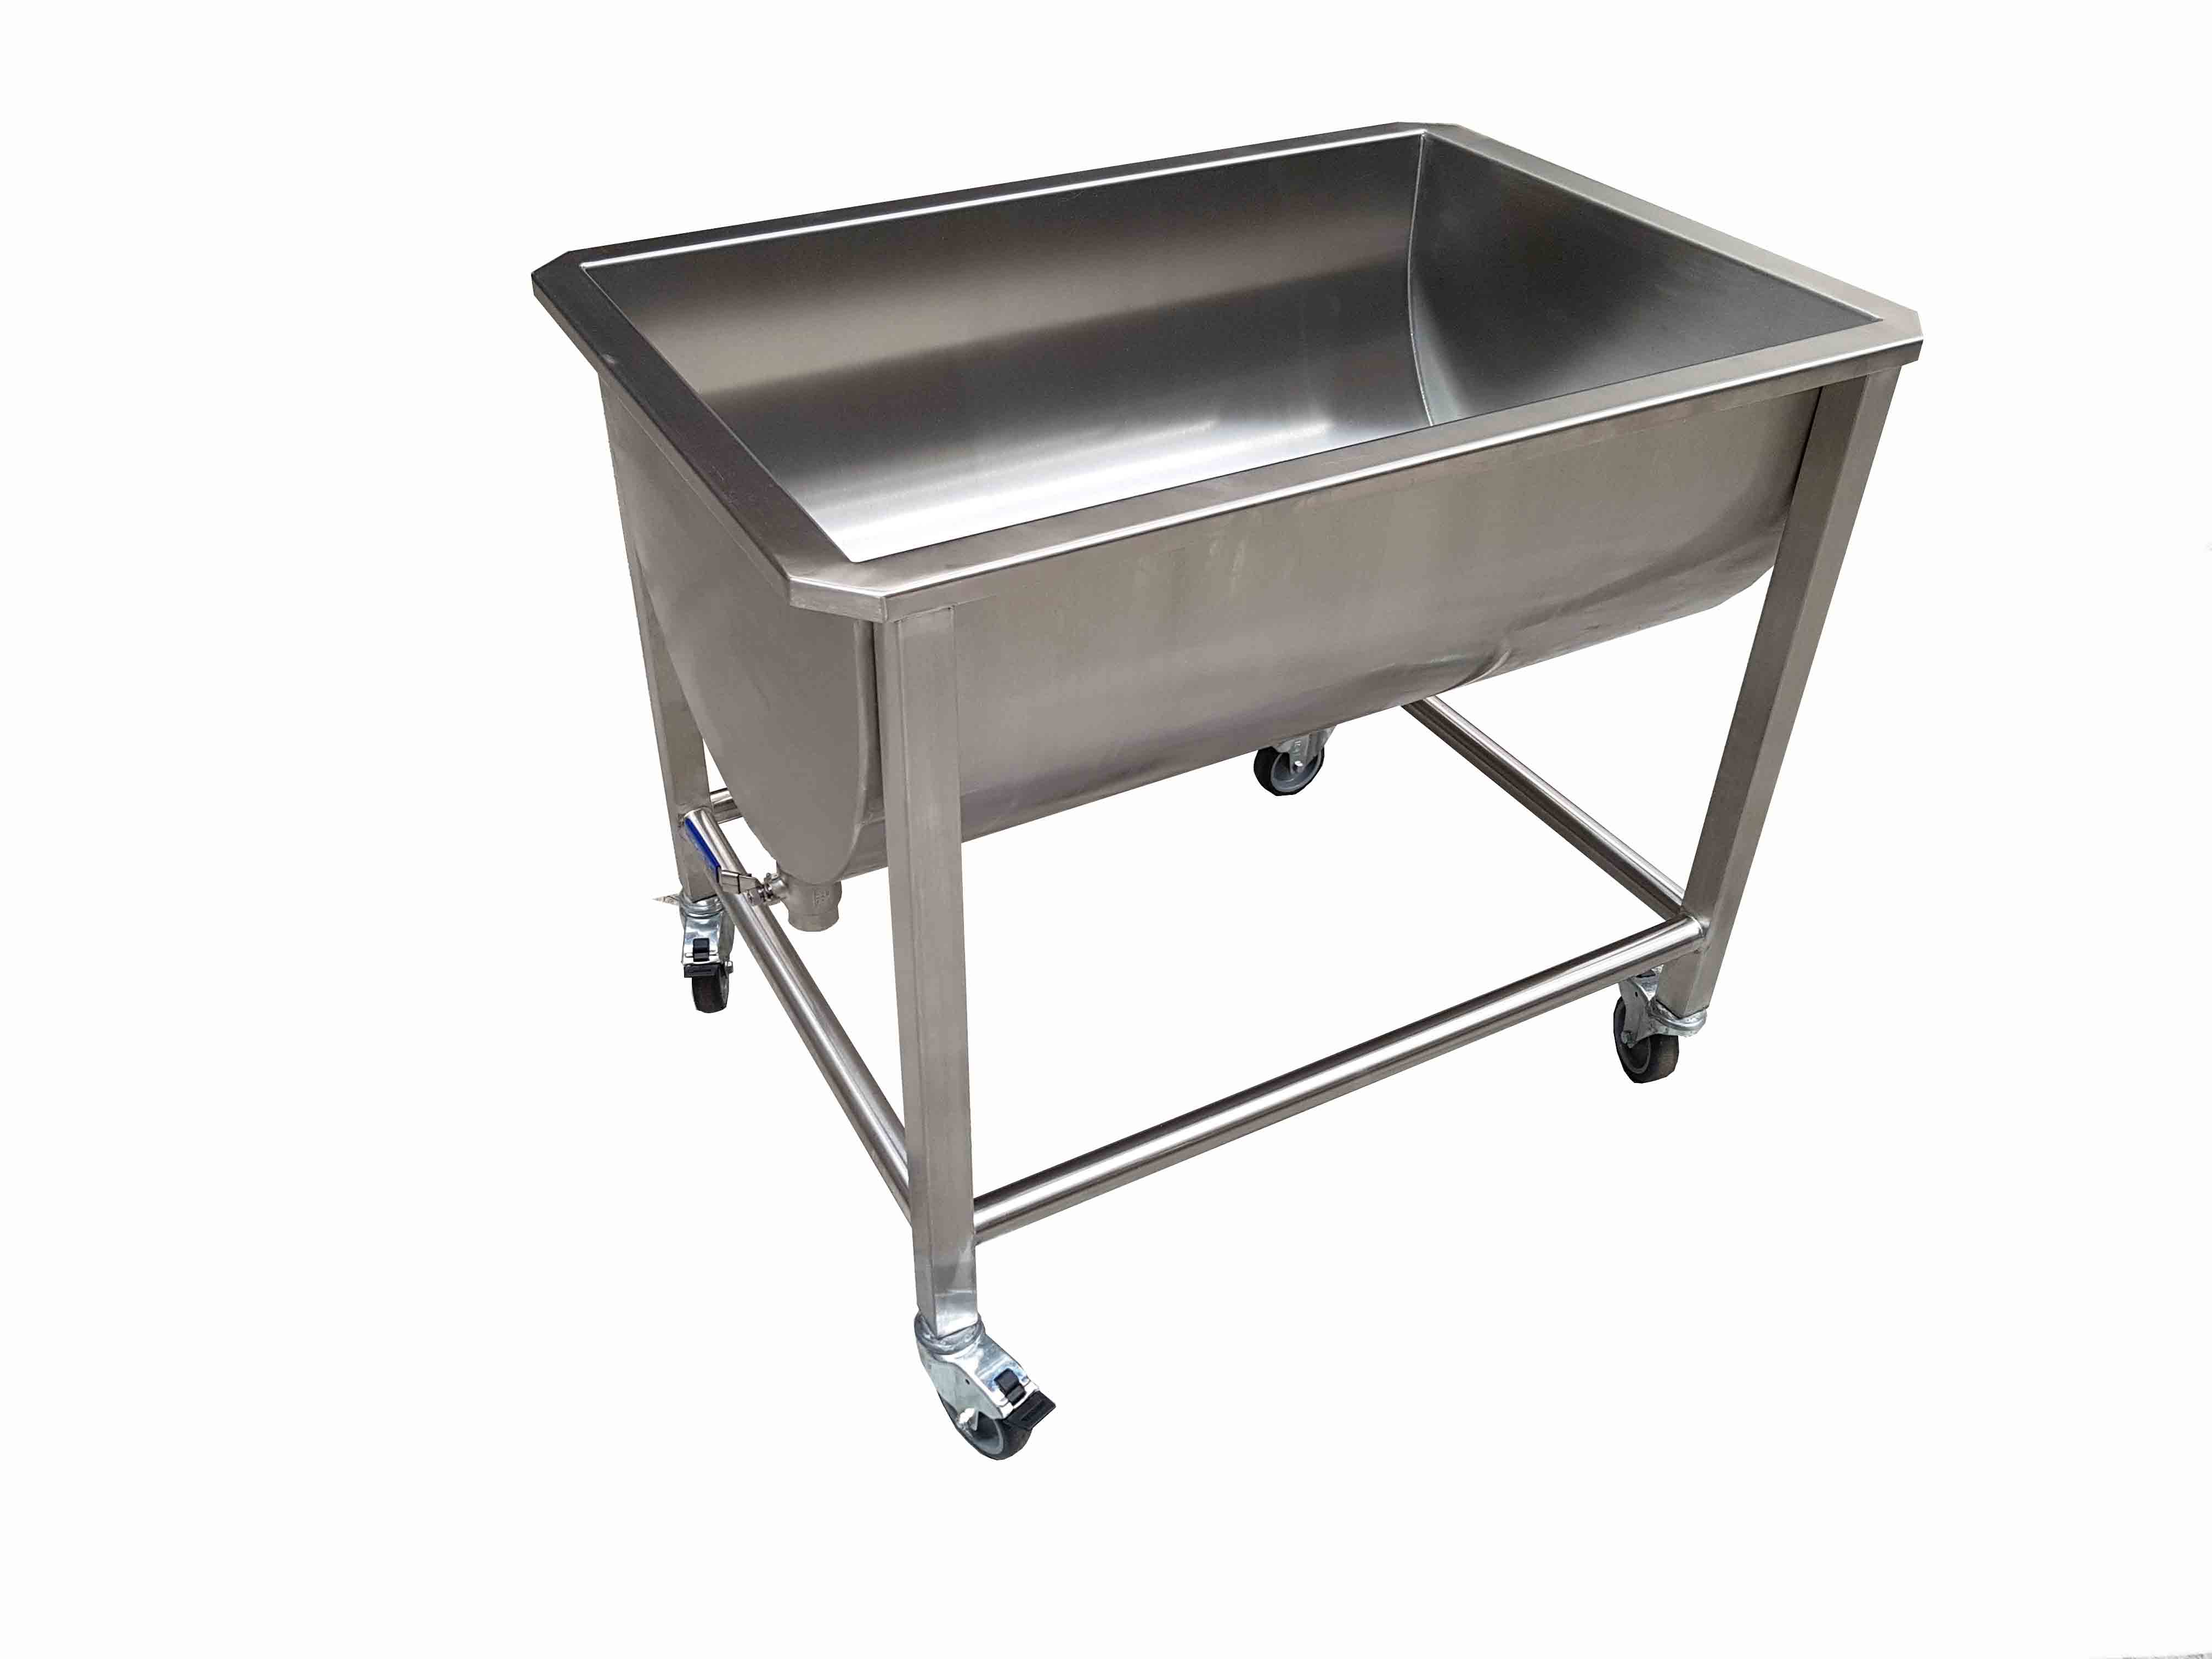 How to clean stainless steel equipment in your commercial kitchen